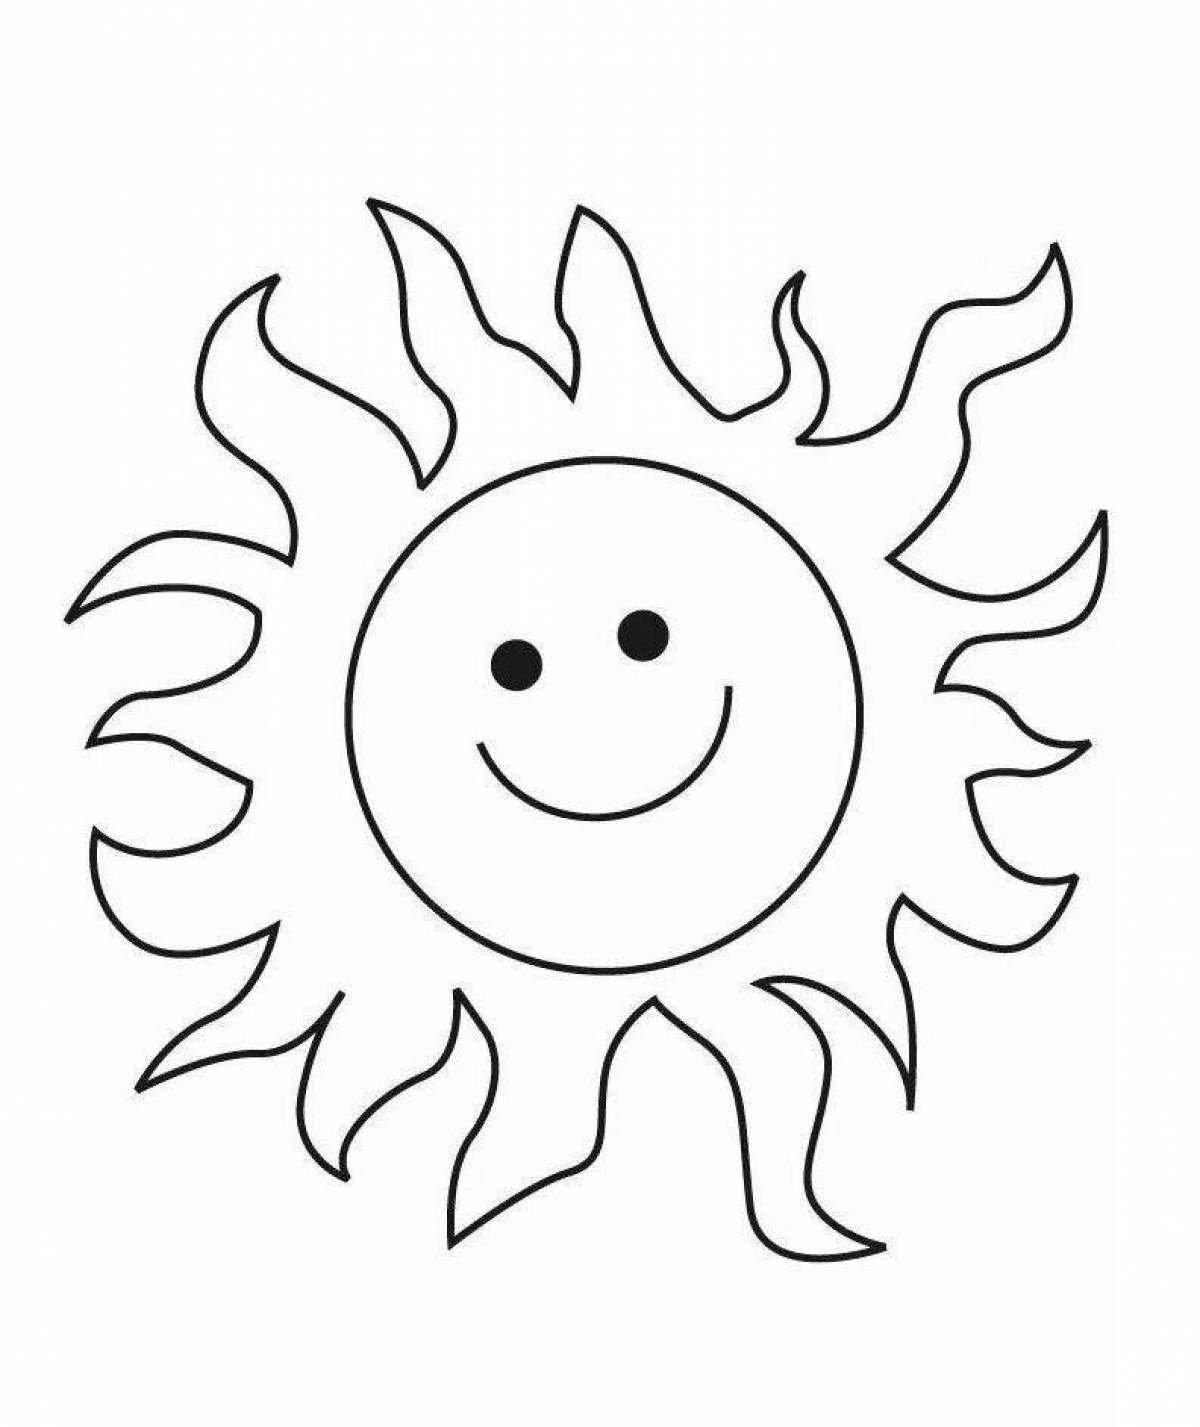 Coloring book incandescent sun drawing